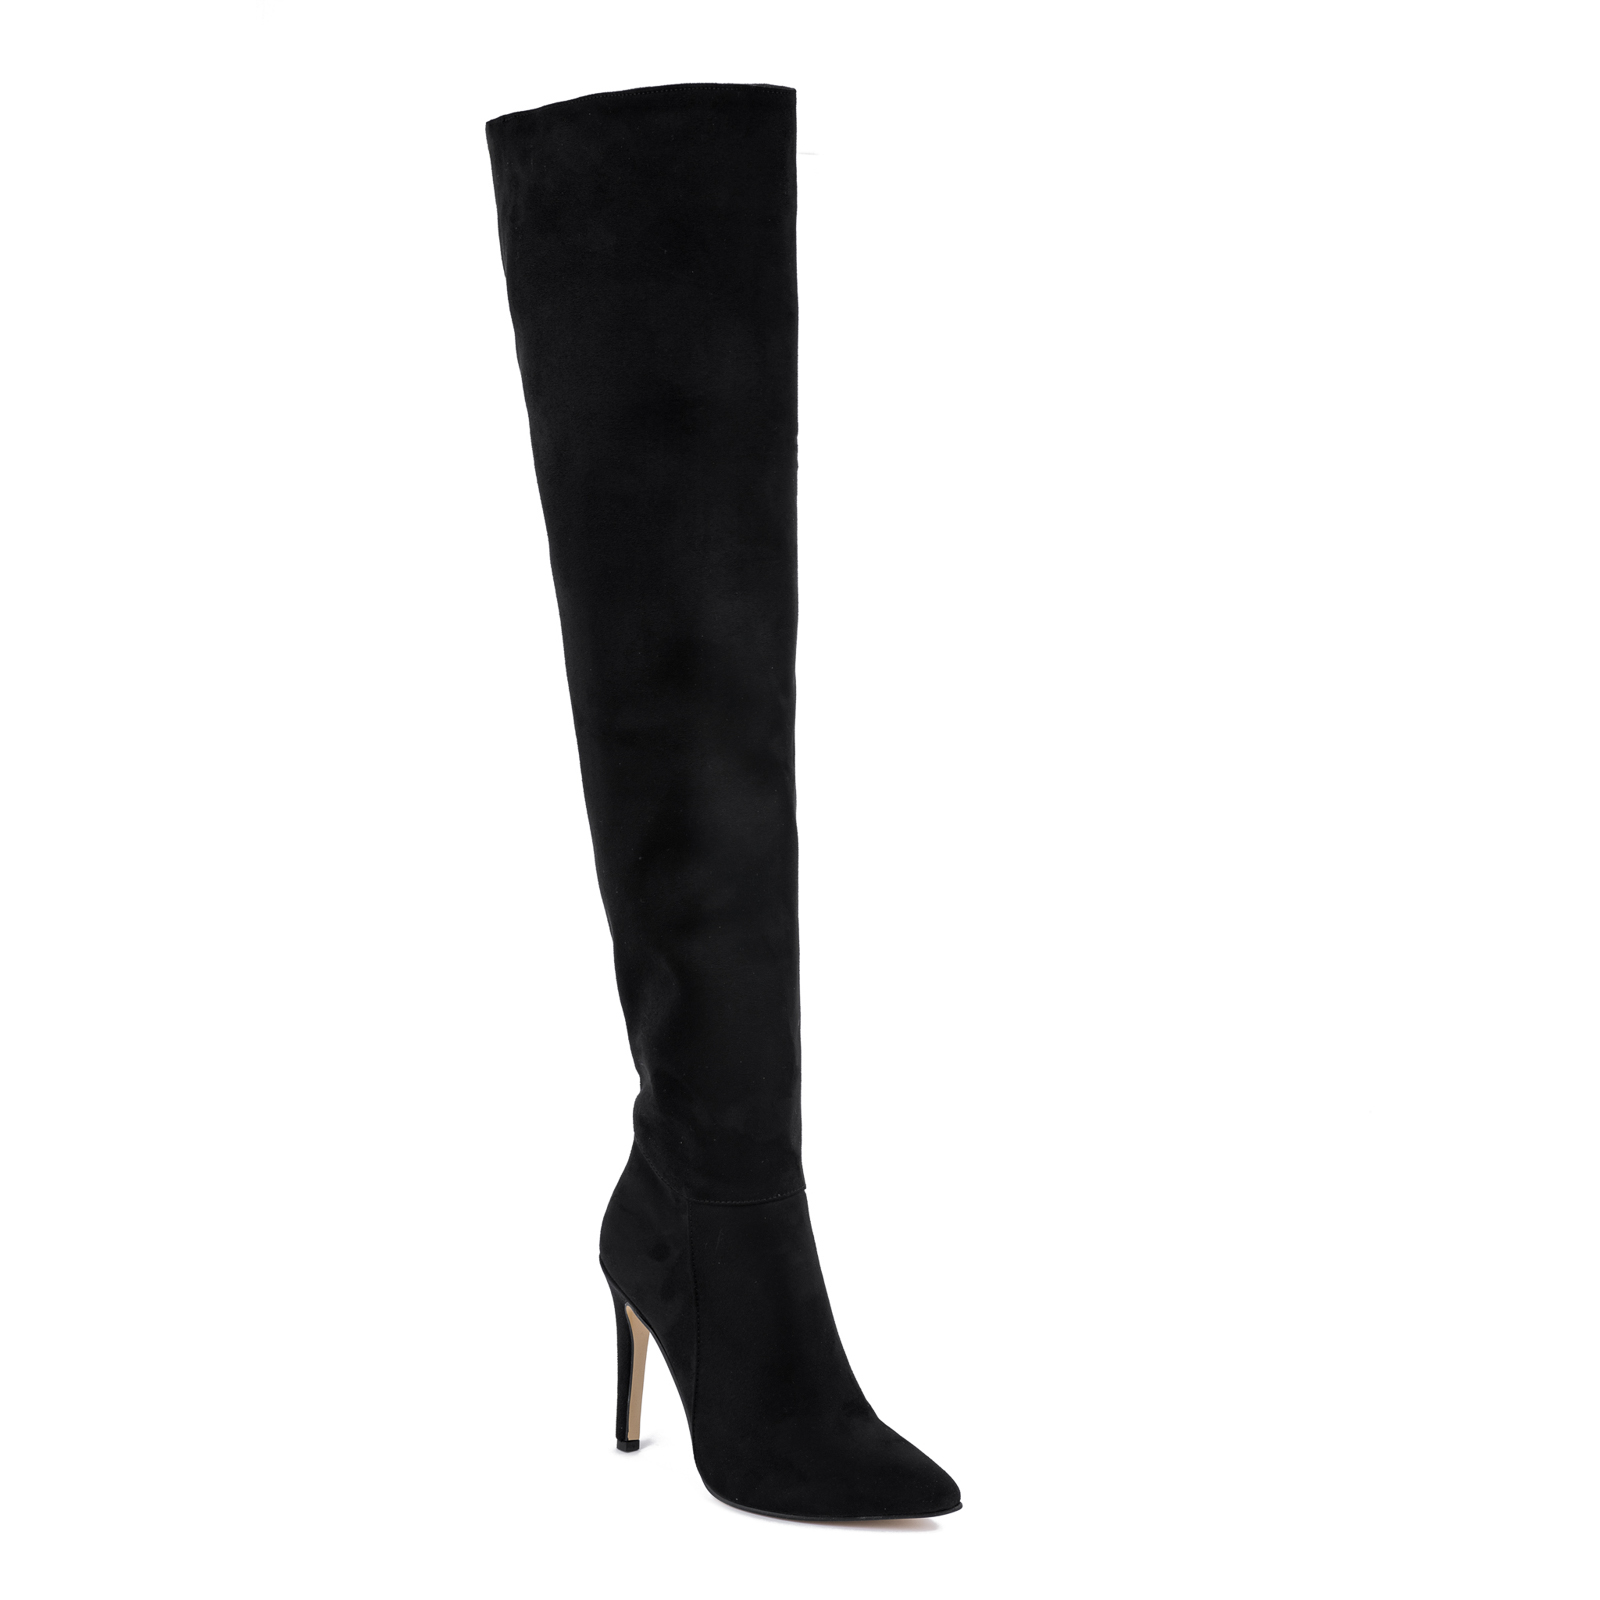 VELOUR HIGH BOOTS WITH THIN HEEL - BLACK